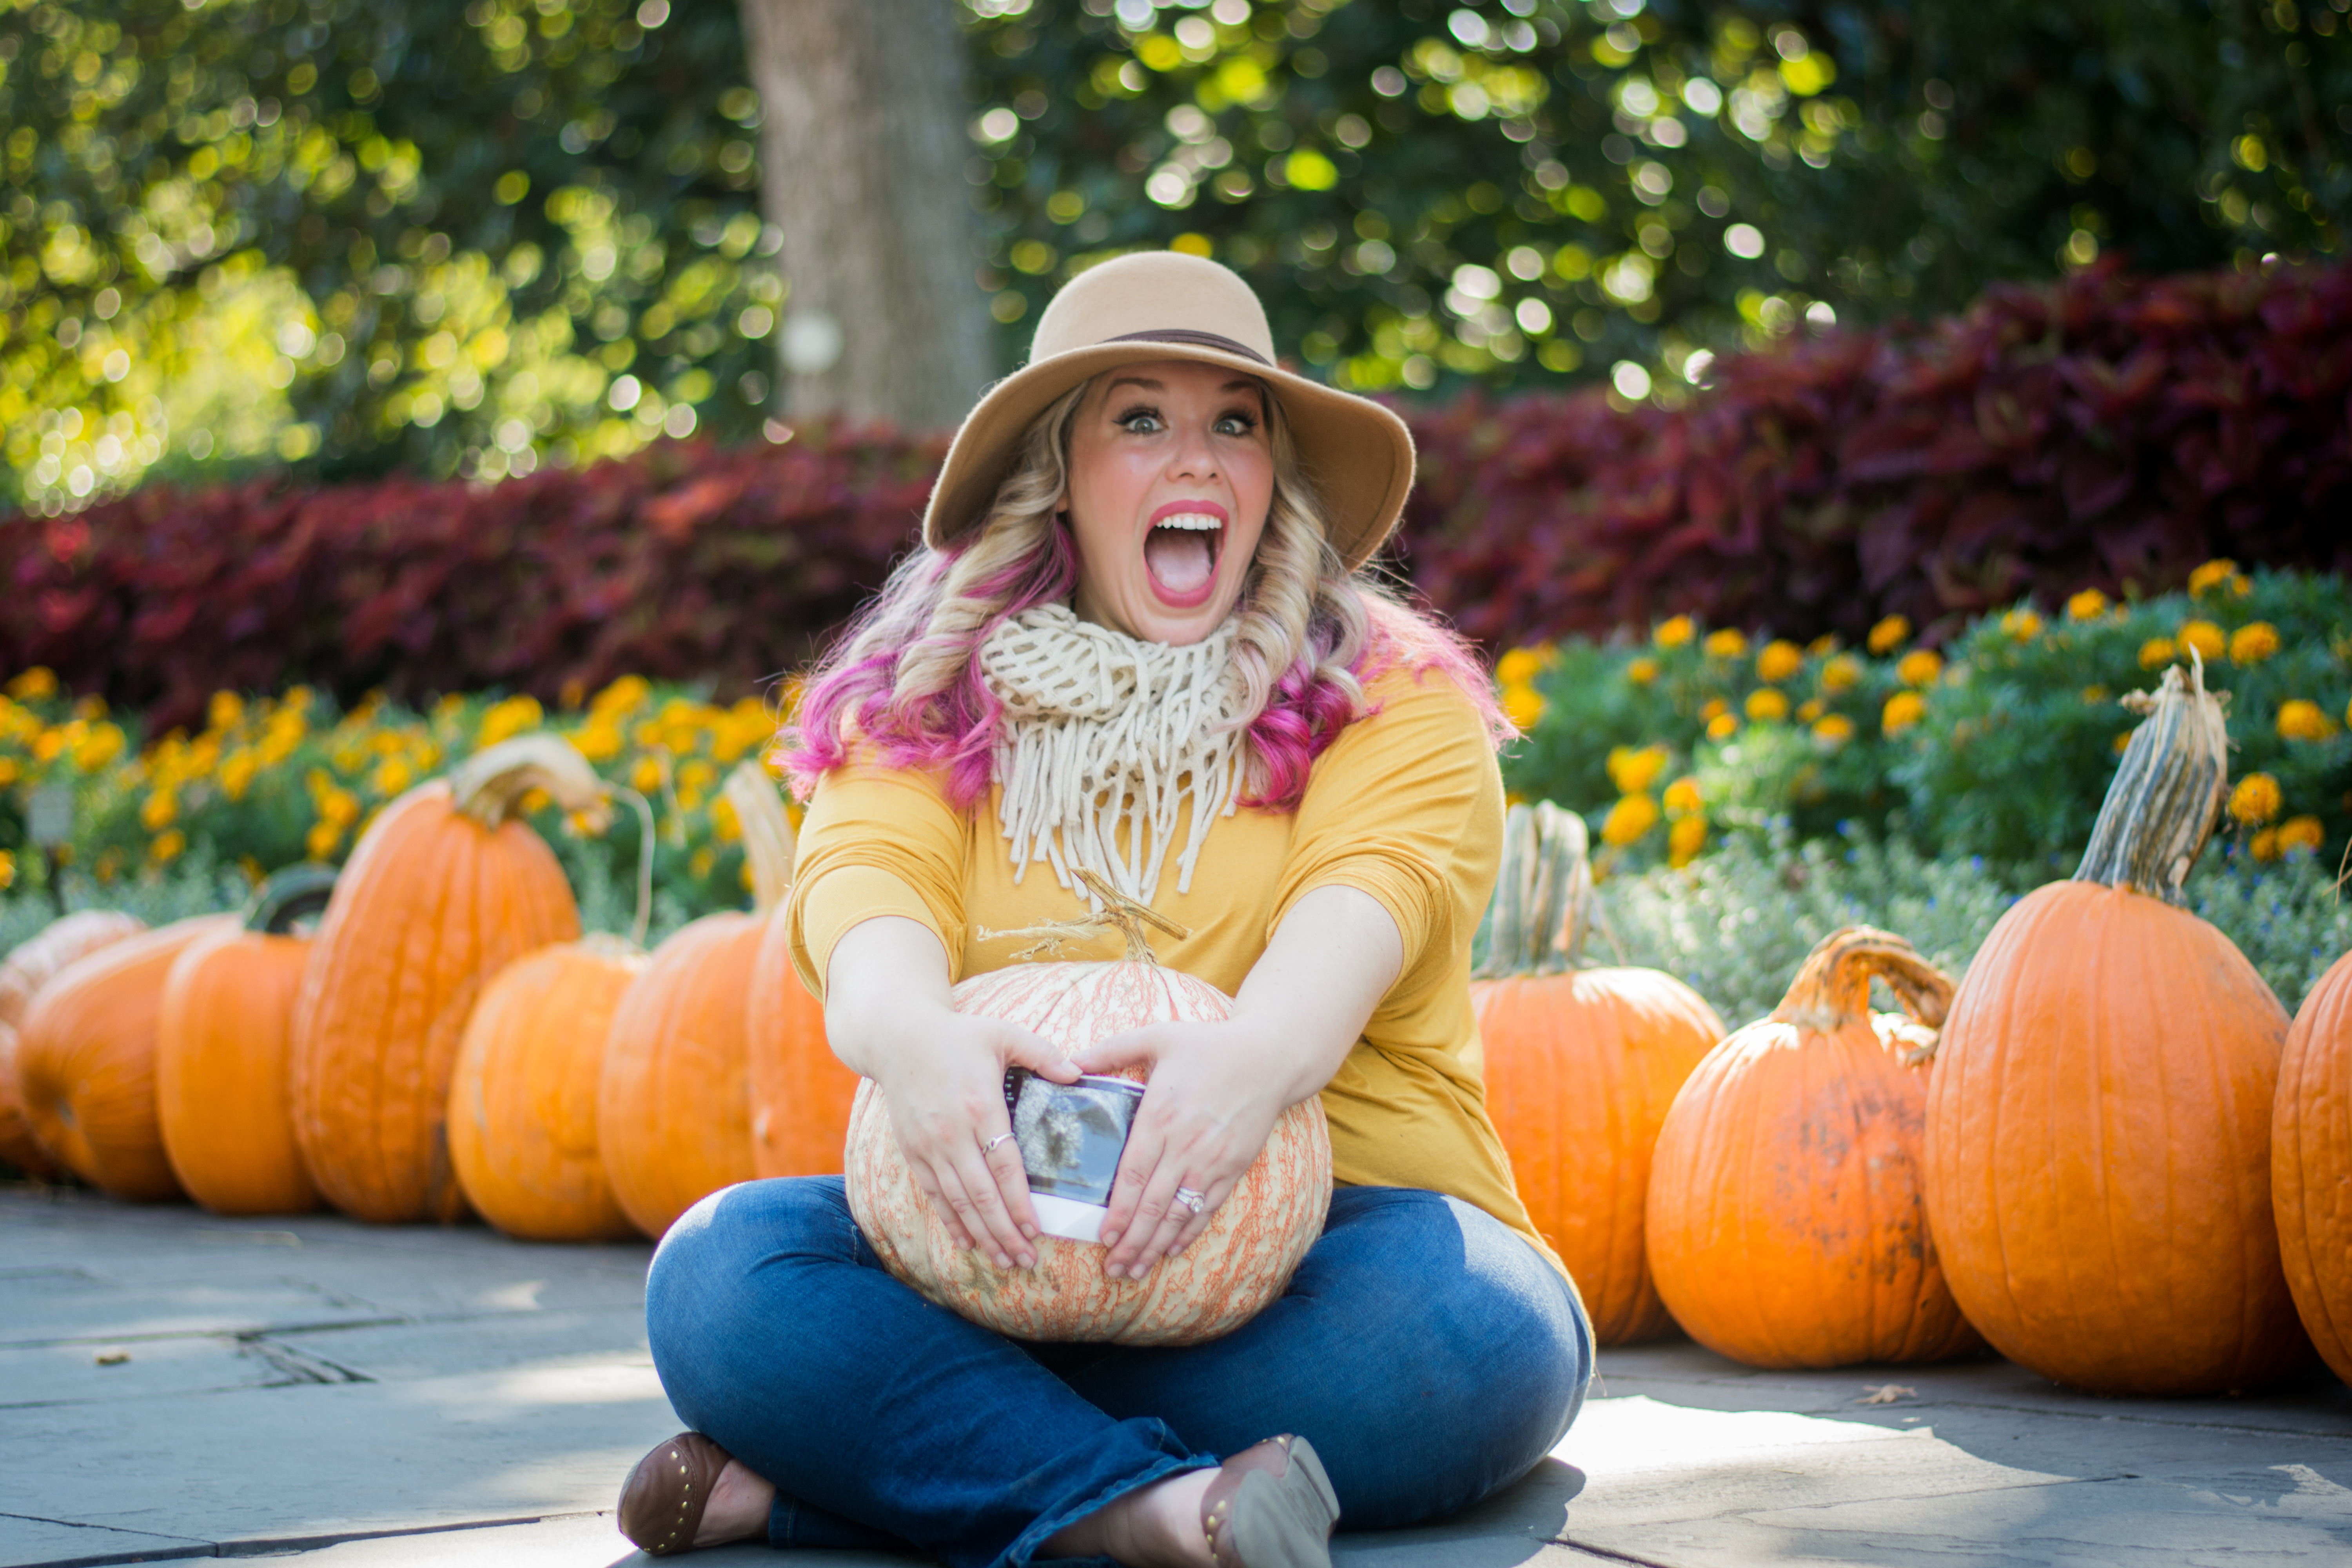 This Fall pregnancy announcement photo shoot is just adorable! Check it out at The Vintage Modern Wife